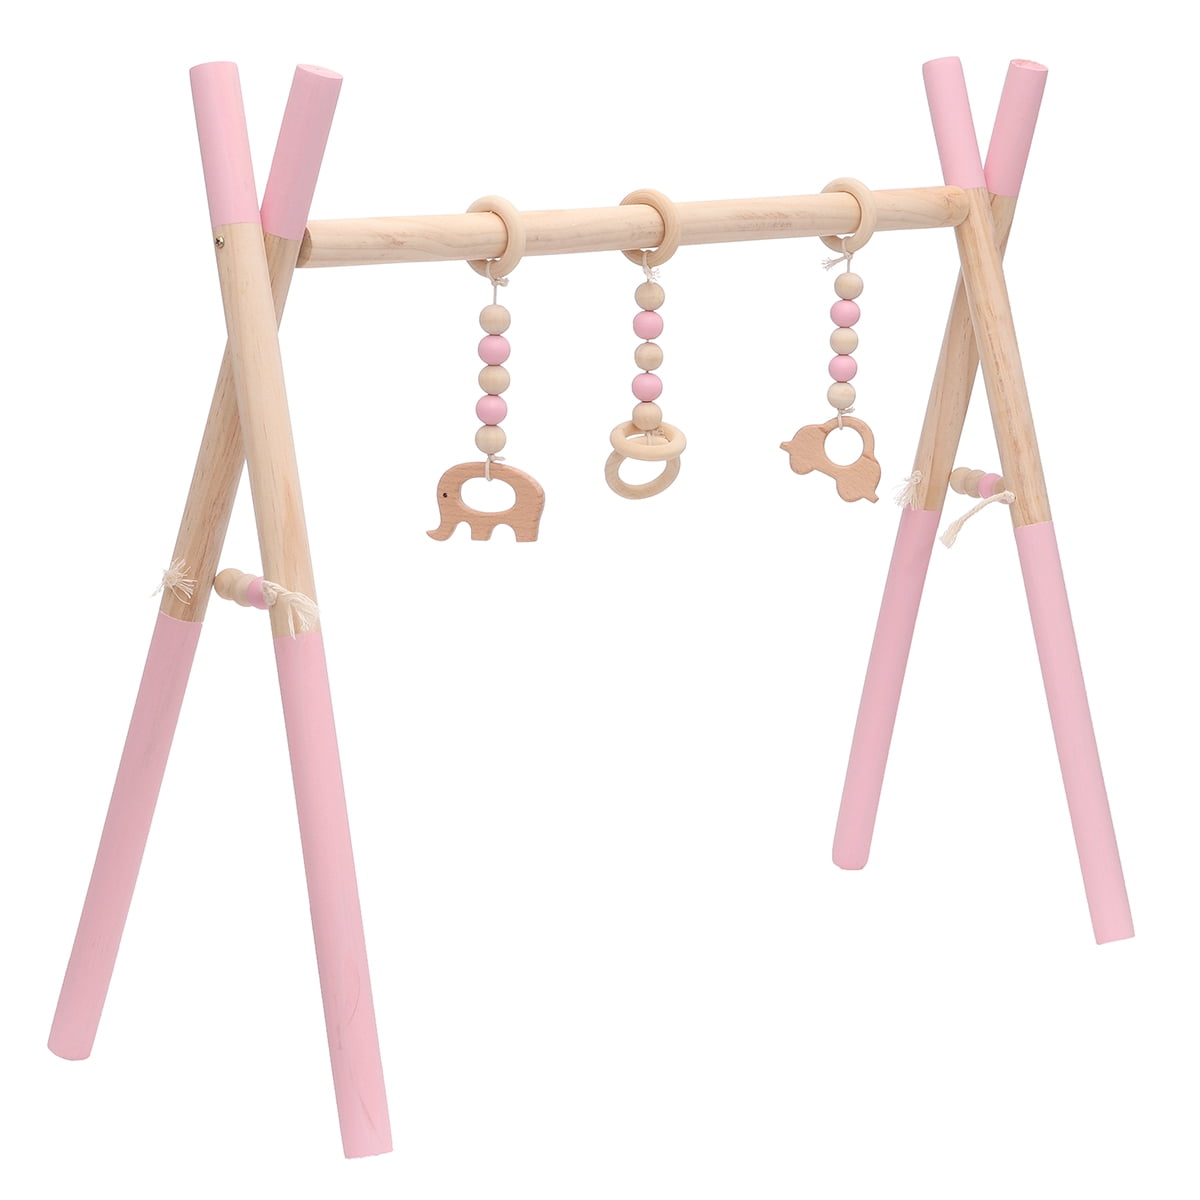 wooden activity center play gym